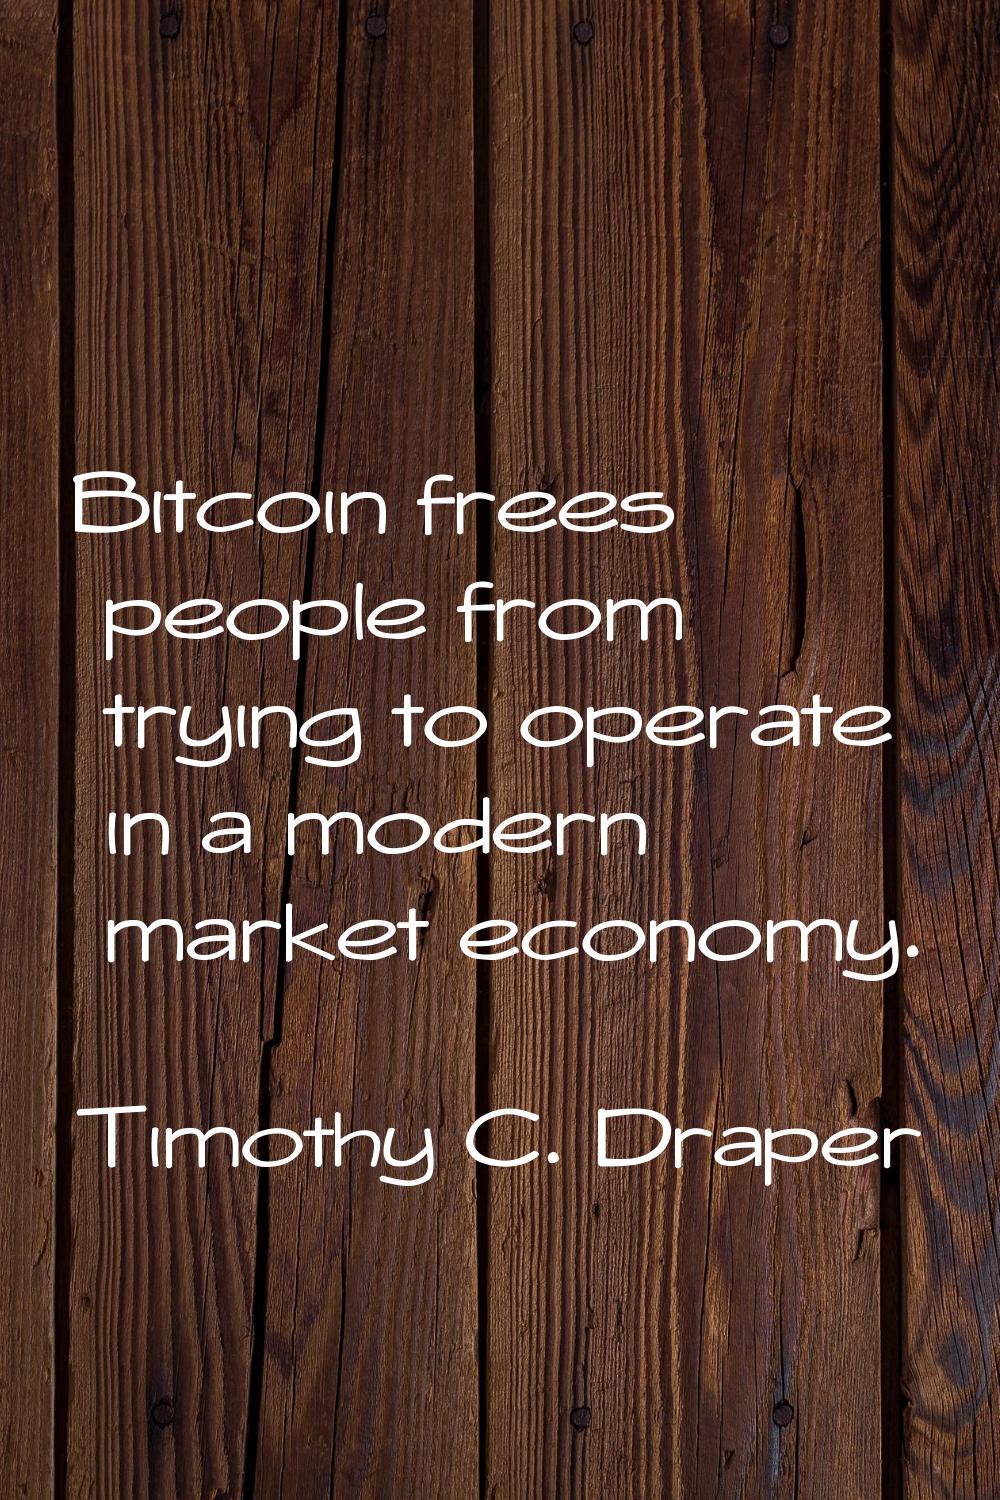 Bitcoin frees people from trying to operate in a modern market economy.